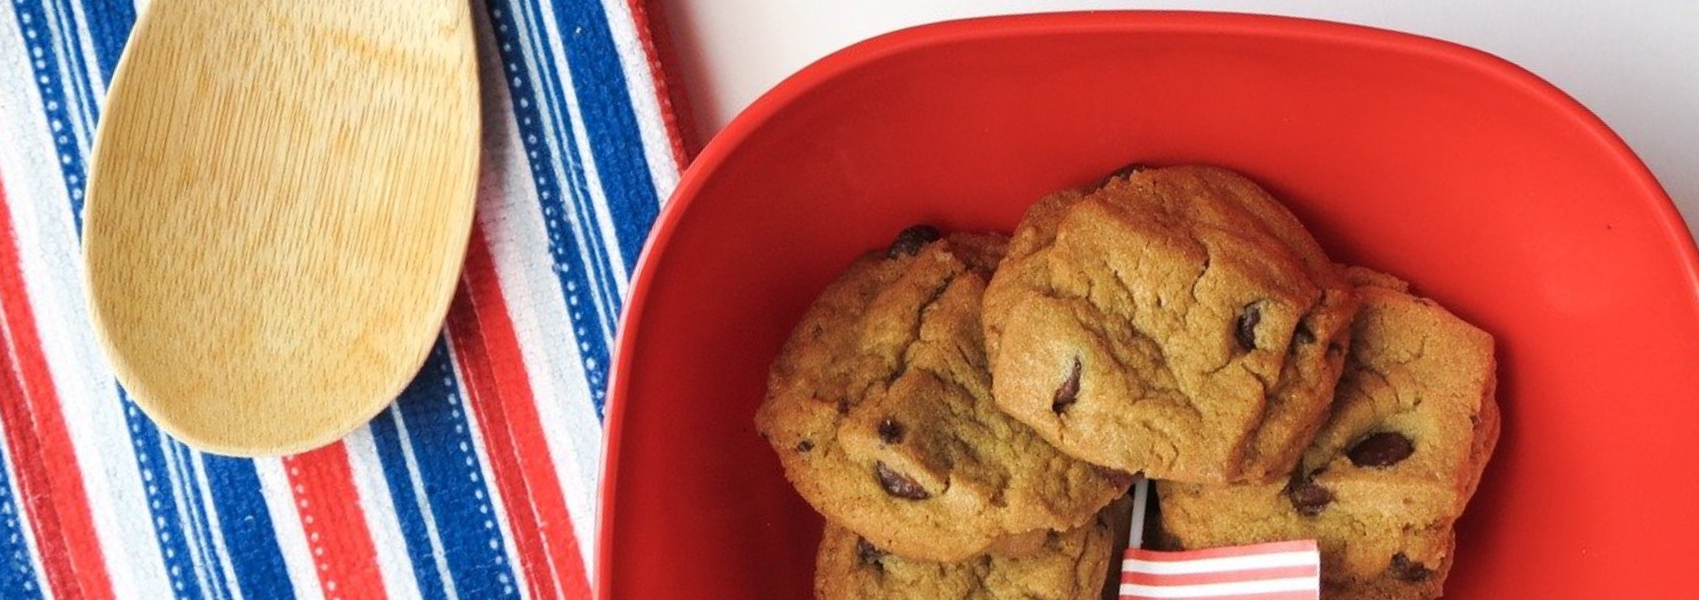 Focus on Data: The Most Loved 4th of July Picnic Food